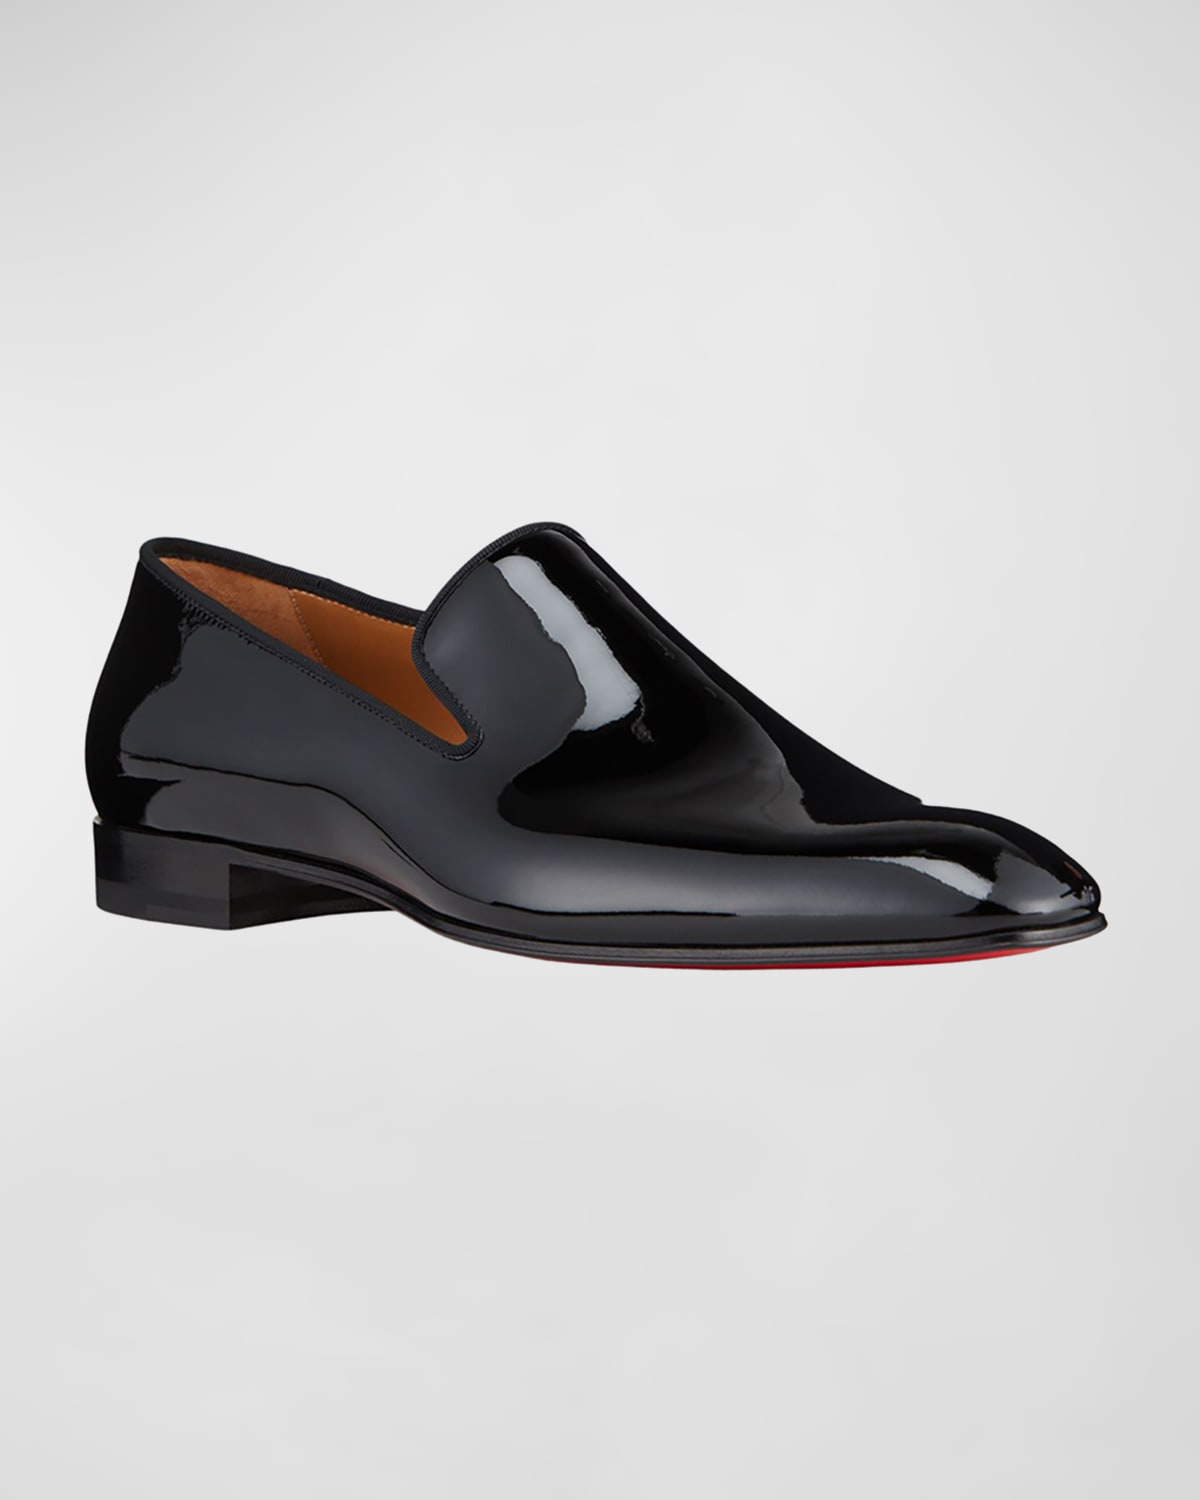 Men's Dandelion Patent Leather Loafers